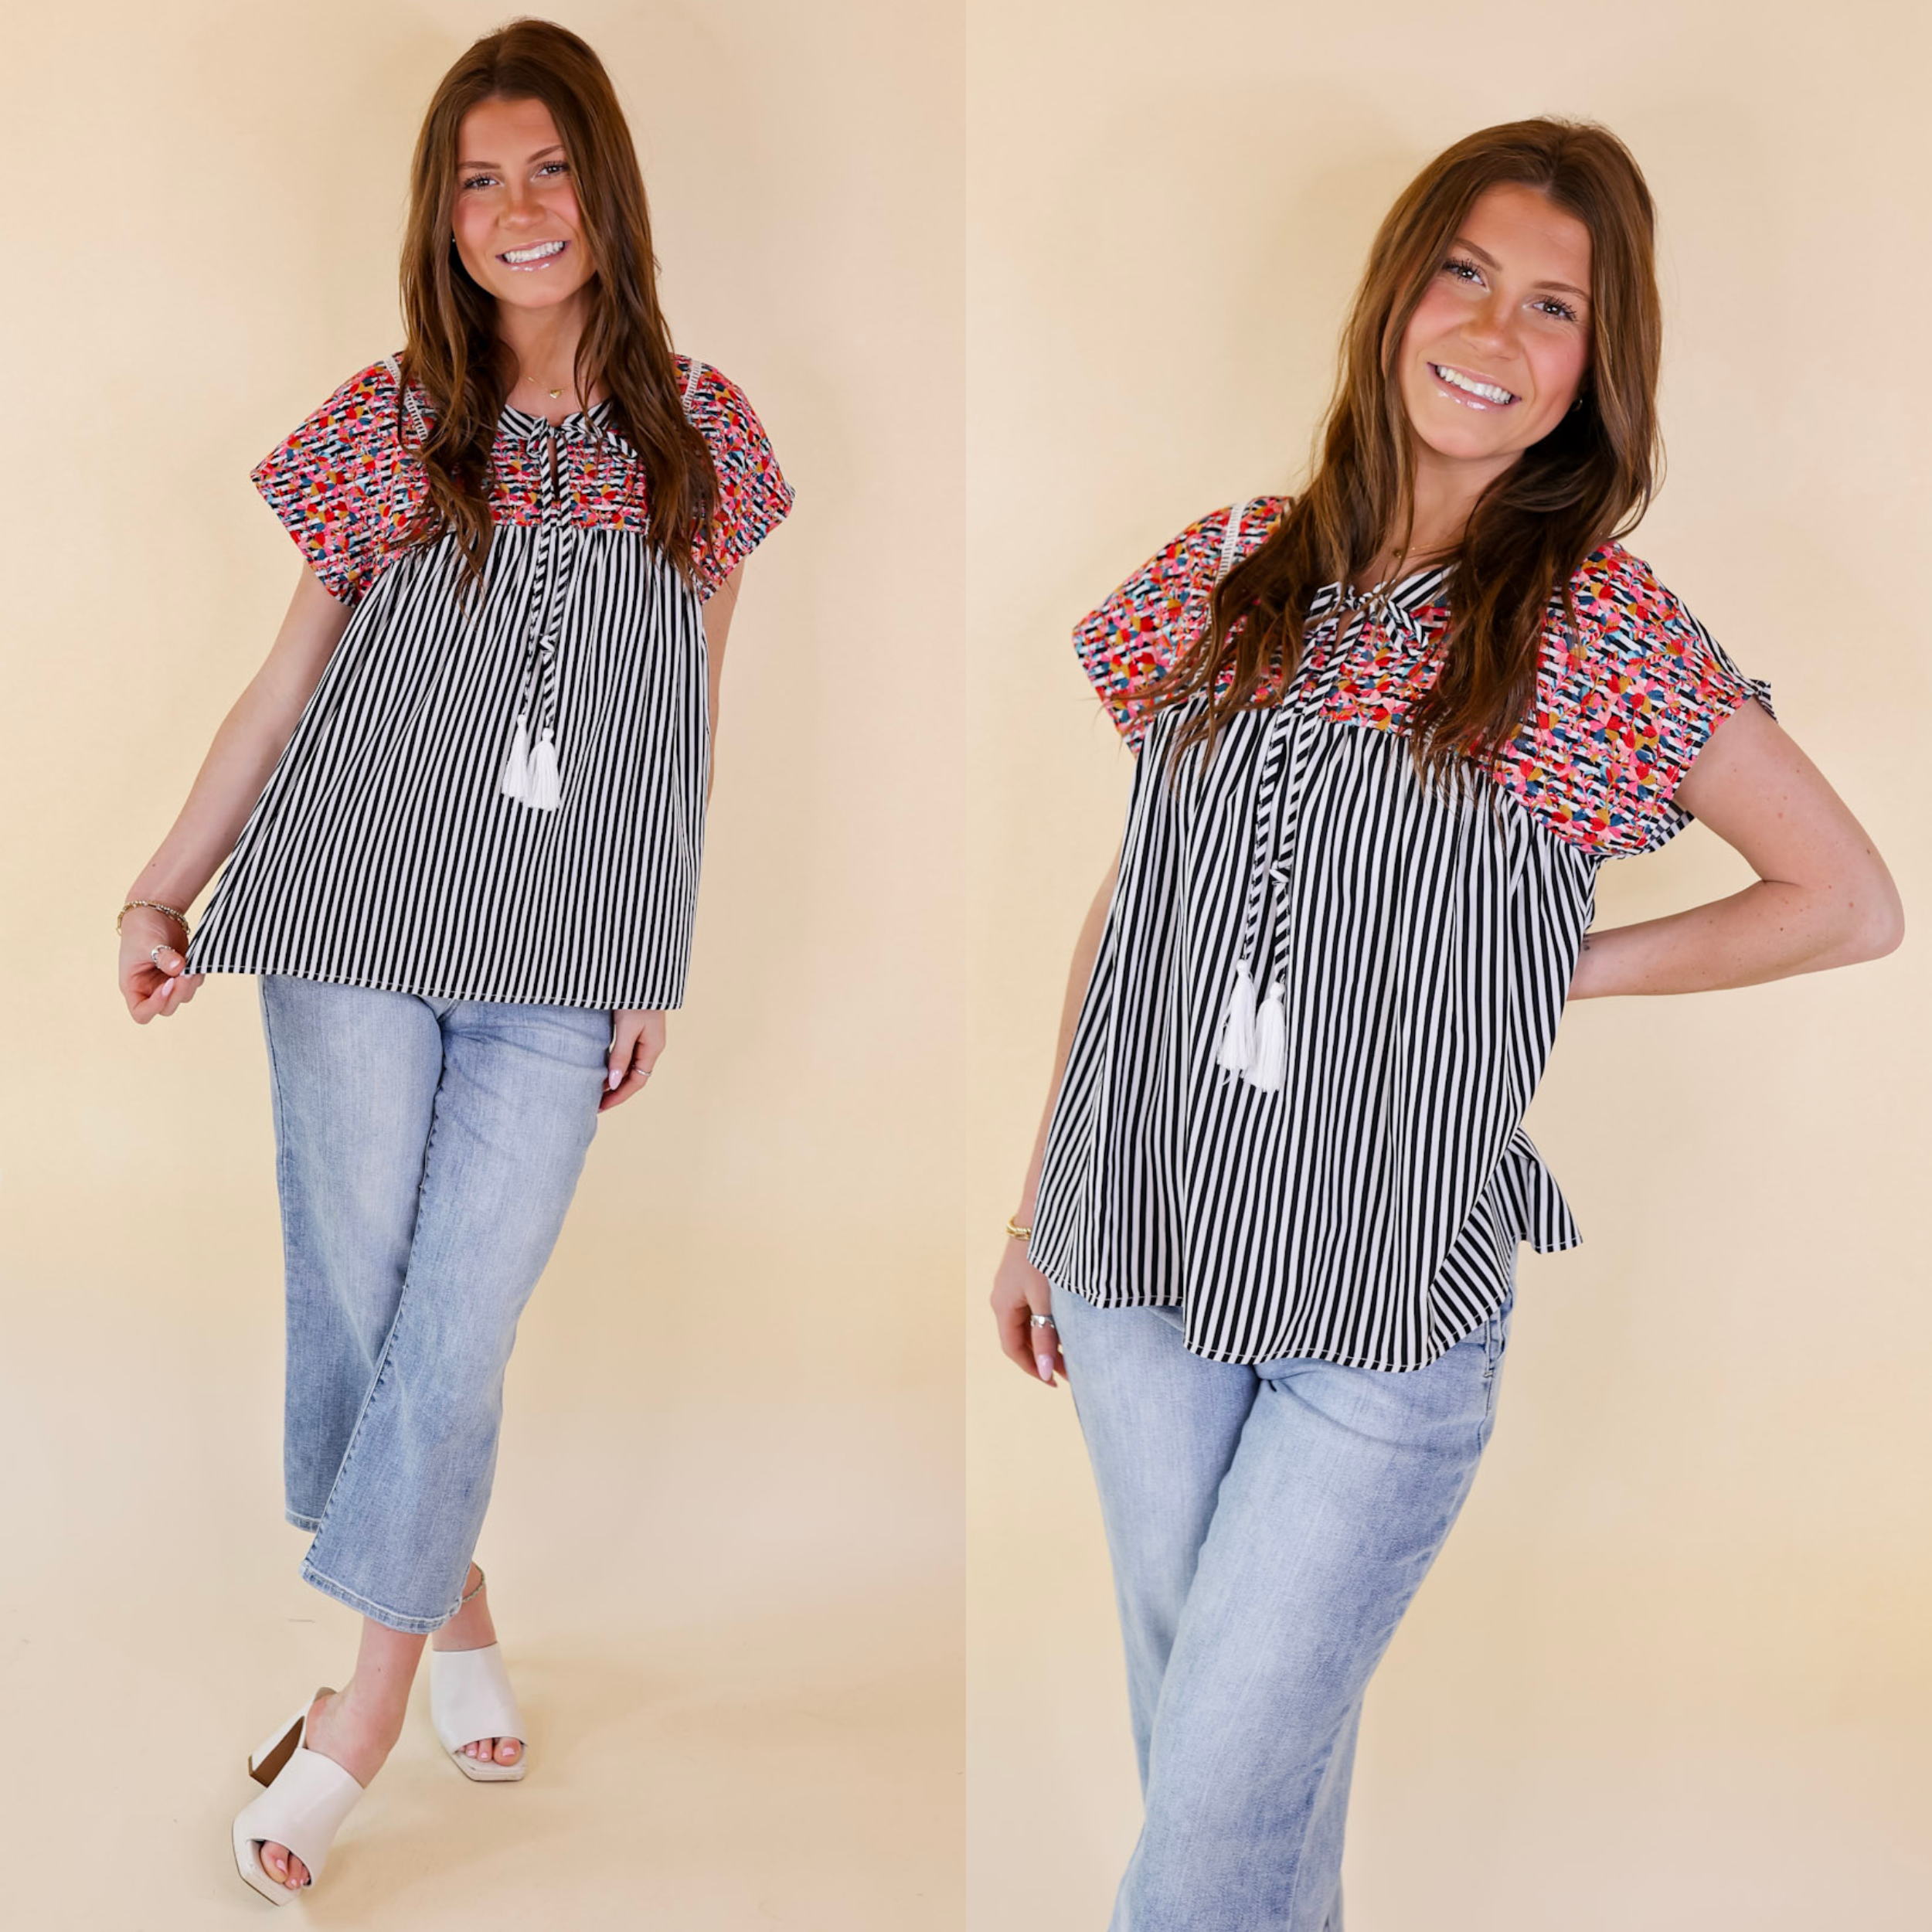 Model is wearing a black and white striped top with floral embroidery. Model has it paired with light wash jeans, ivory heels, and gold jewelry.